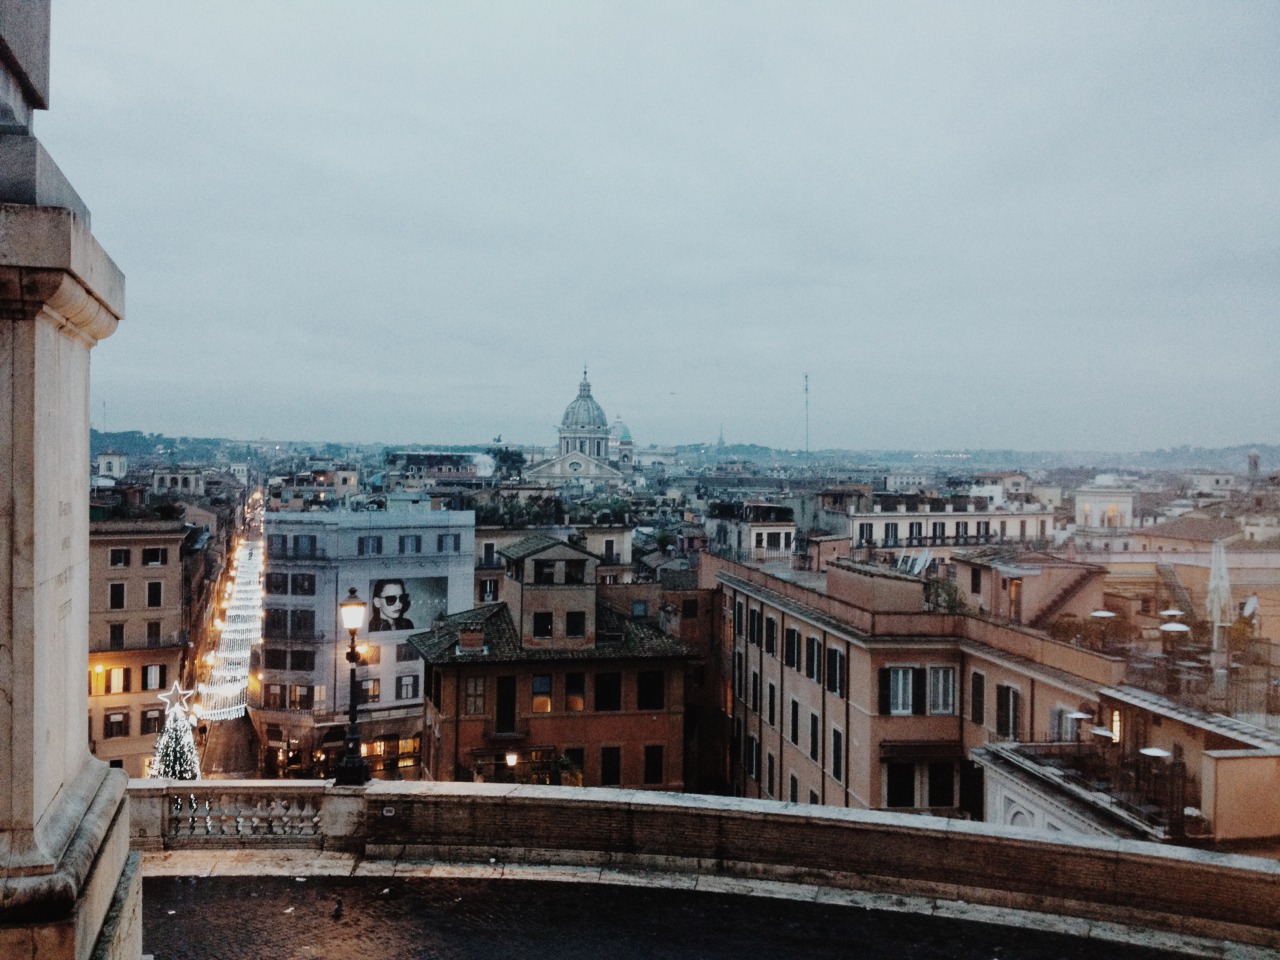 anothertravelblogorwhatever:  View of Rome and St. Peter’s dome from the top of